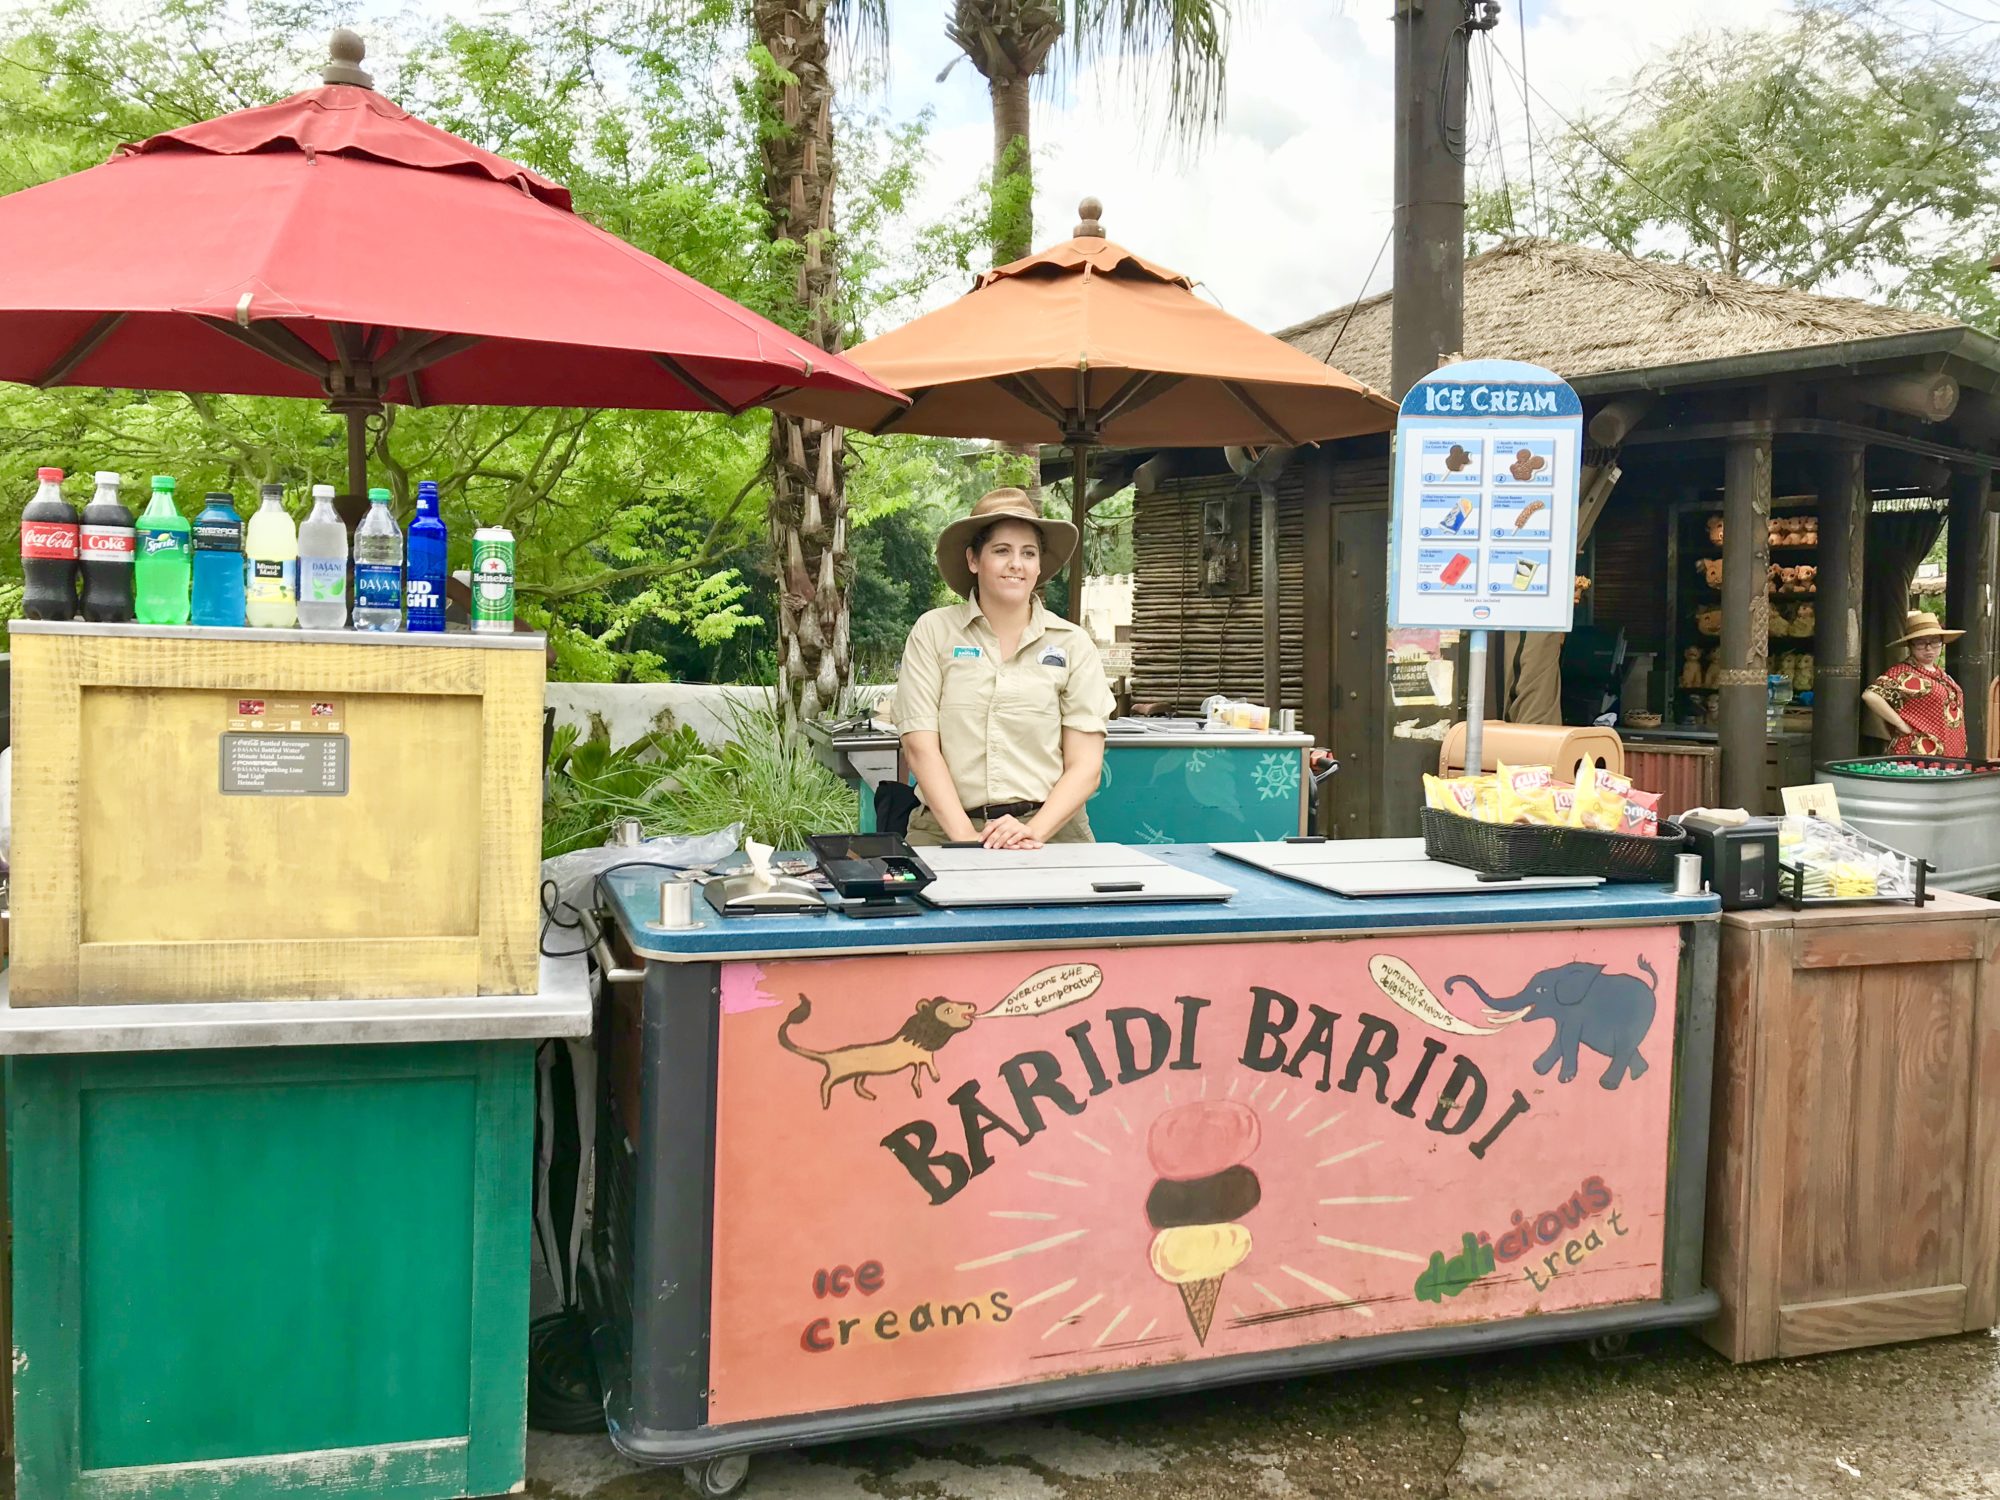 Concession Cart Pops Up in Harambe Village